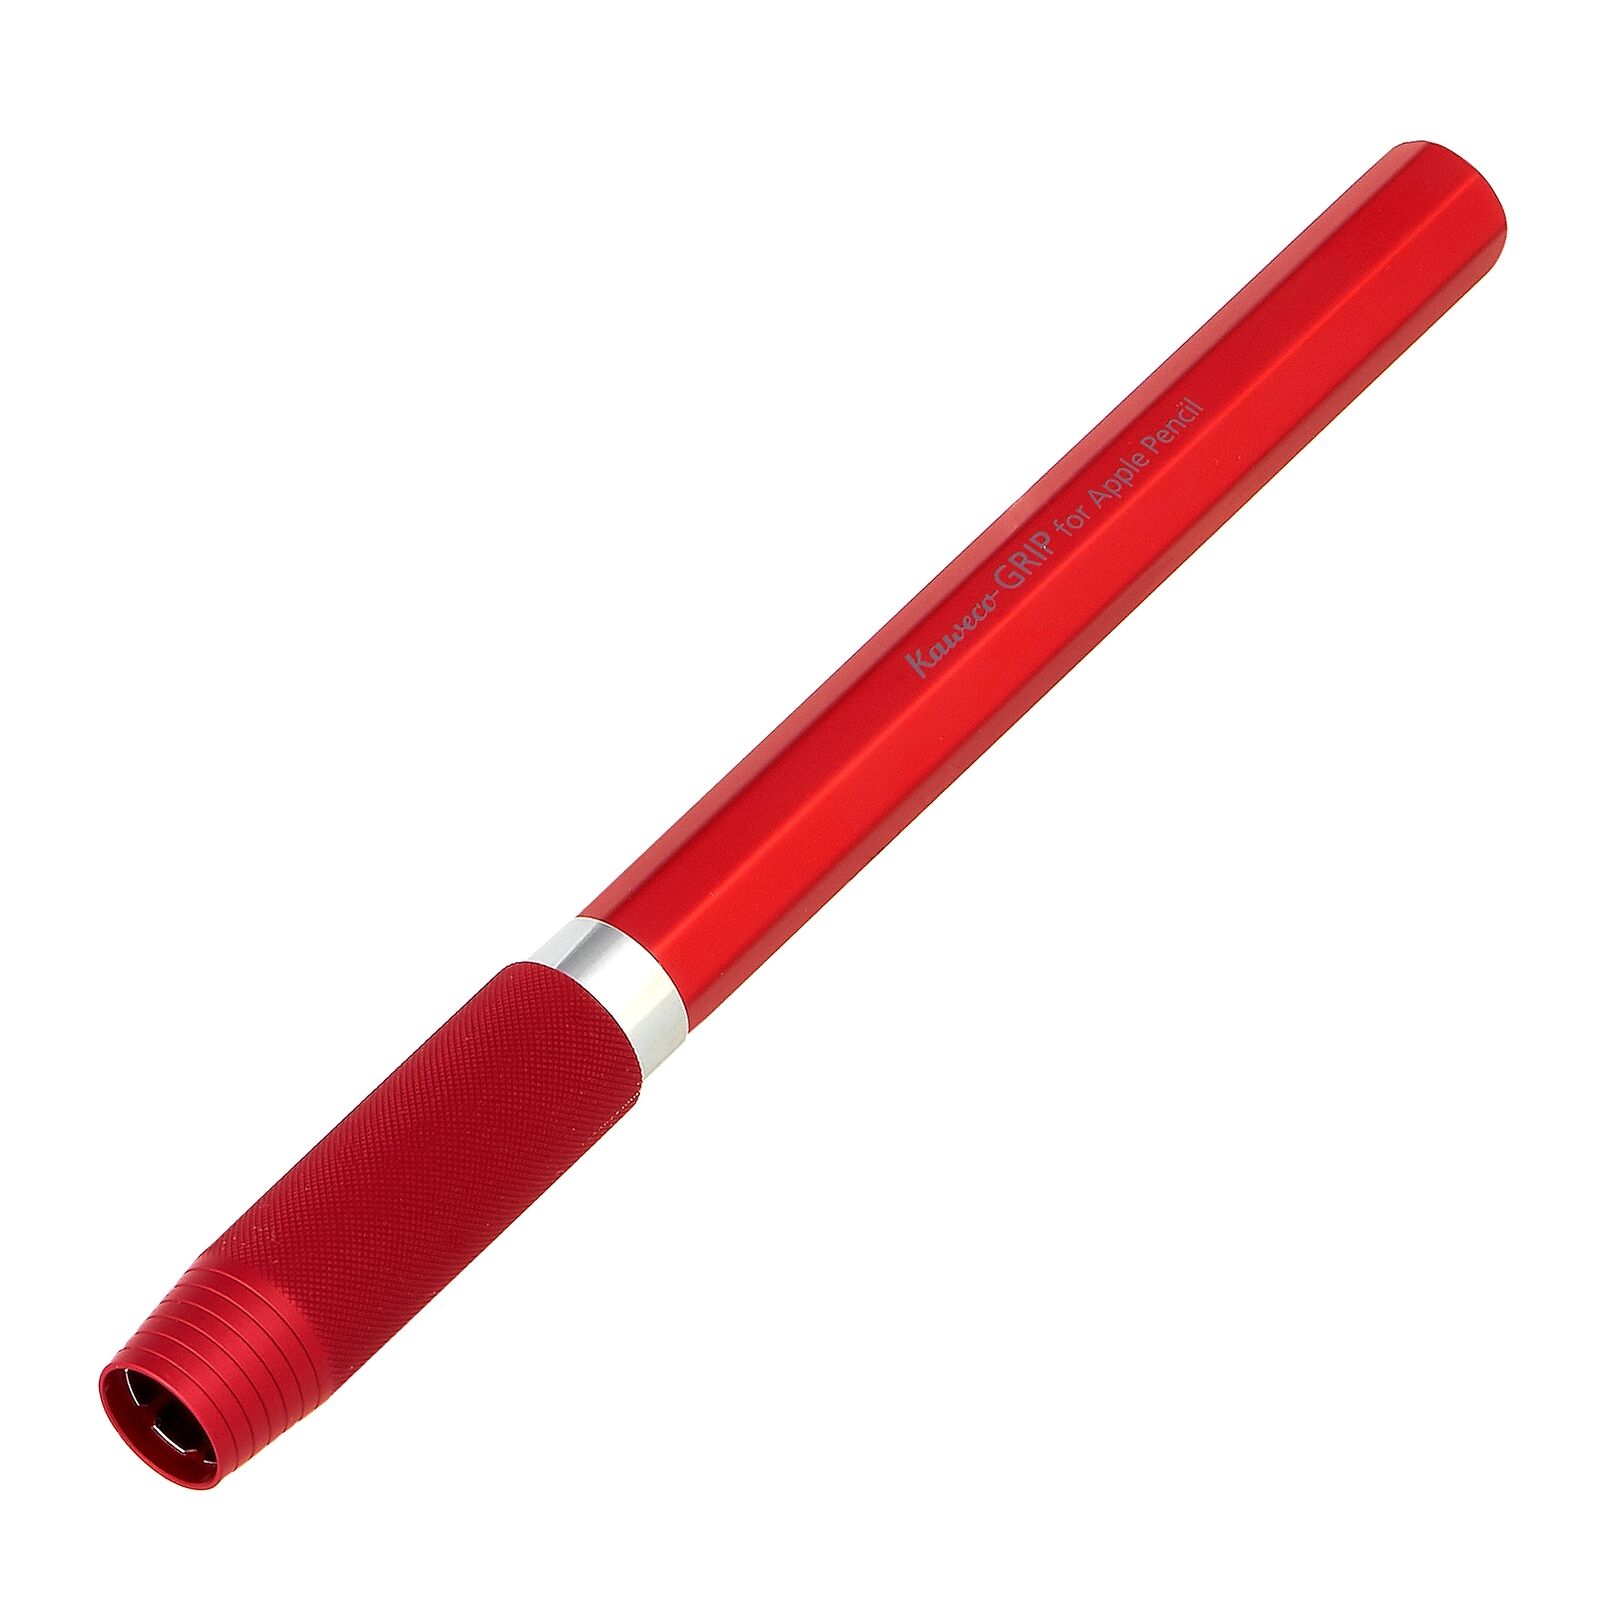 Kaweco GRIP for Apple Pencil Red Pencover 10001761A